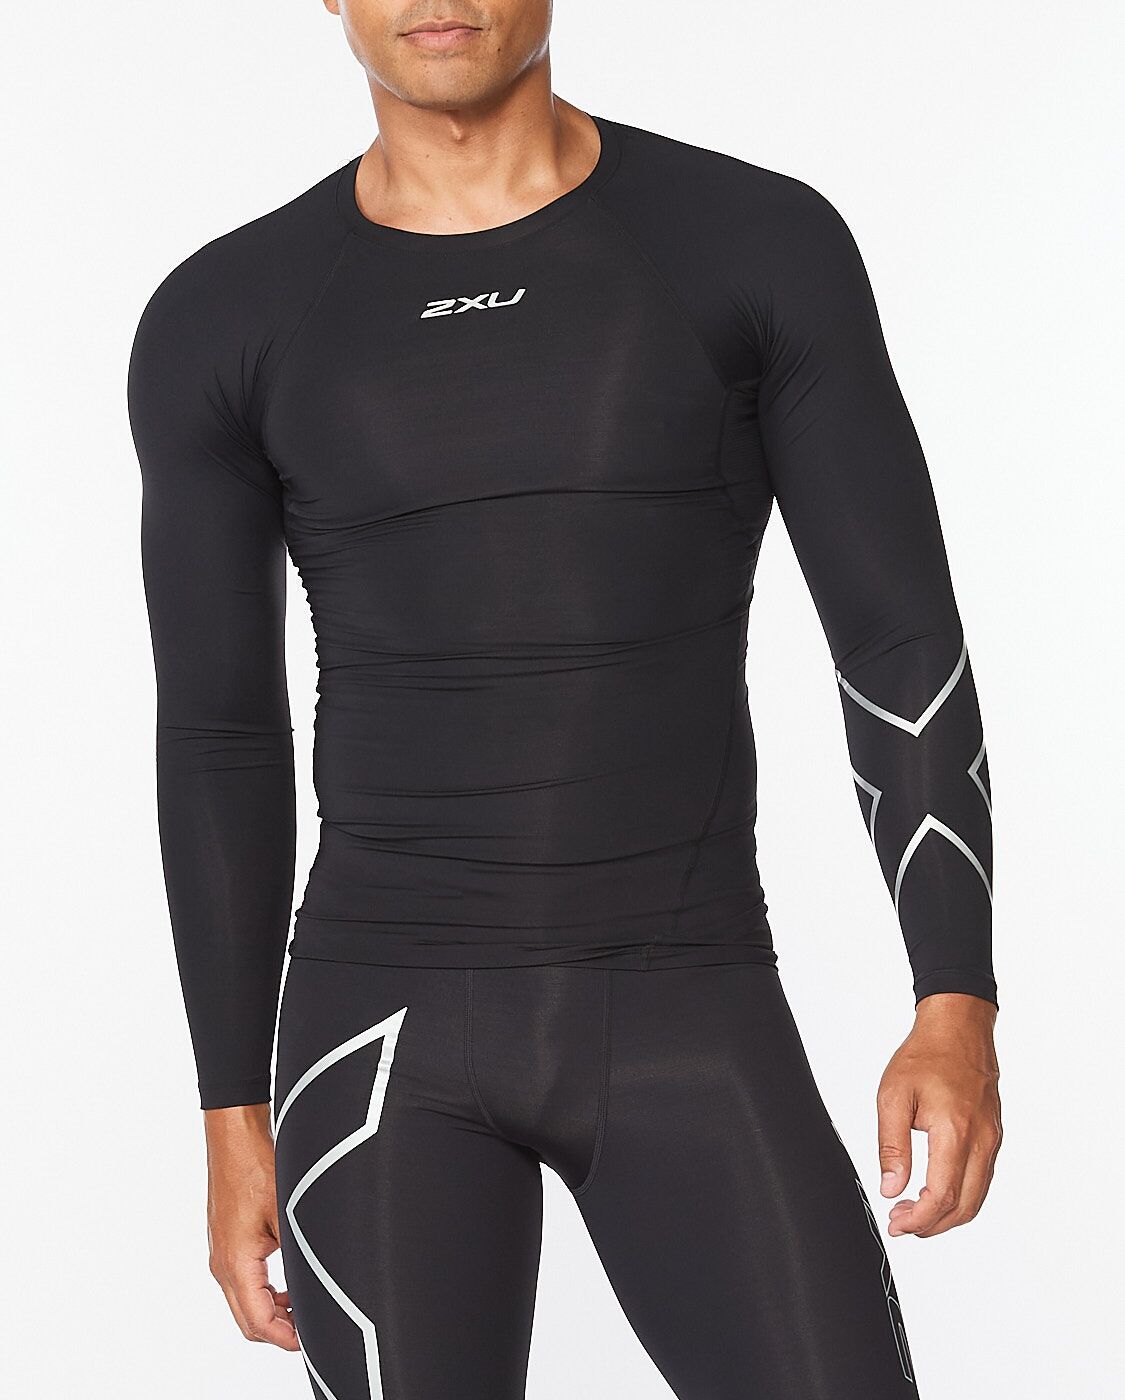 2XU South Africa - Men's Core Compression Long Sleeve - Black/Silver